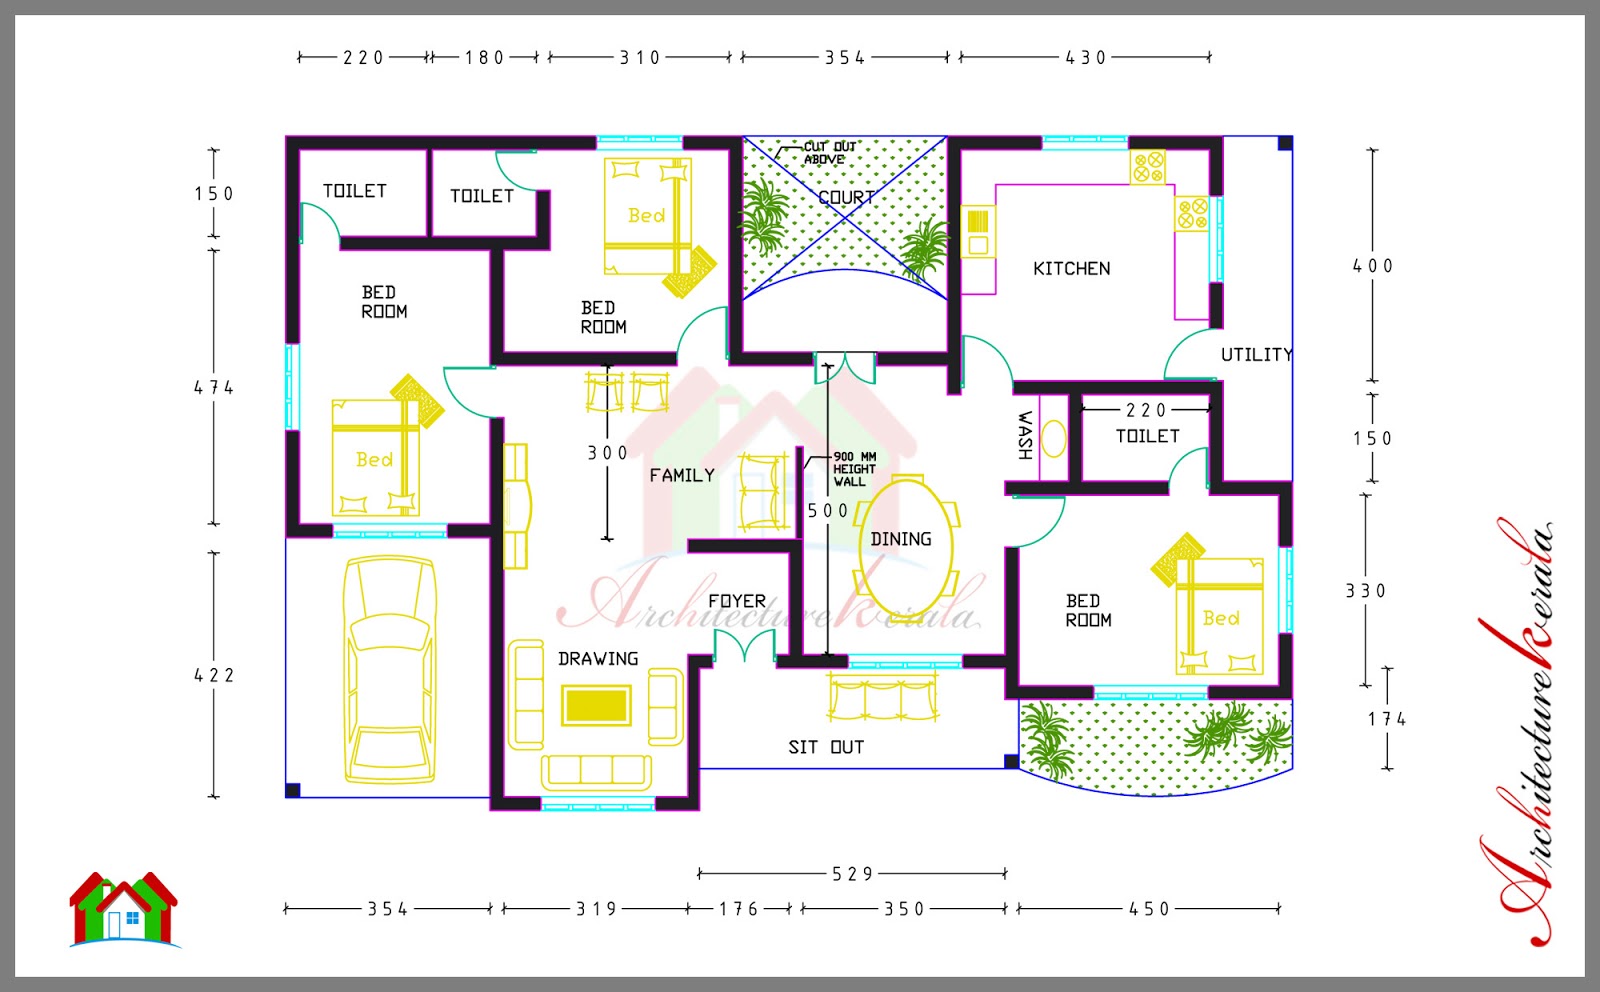 3 BED ROOM  HOUSE  PLAN  WITH ROOM  DIMENSIONS  ARCHITECTURE 